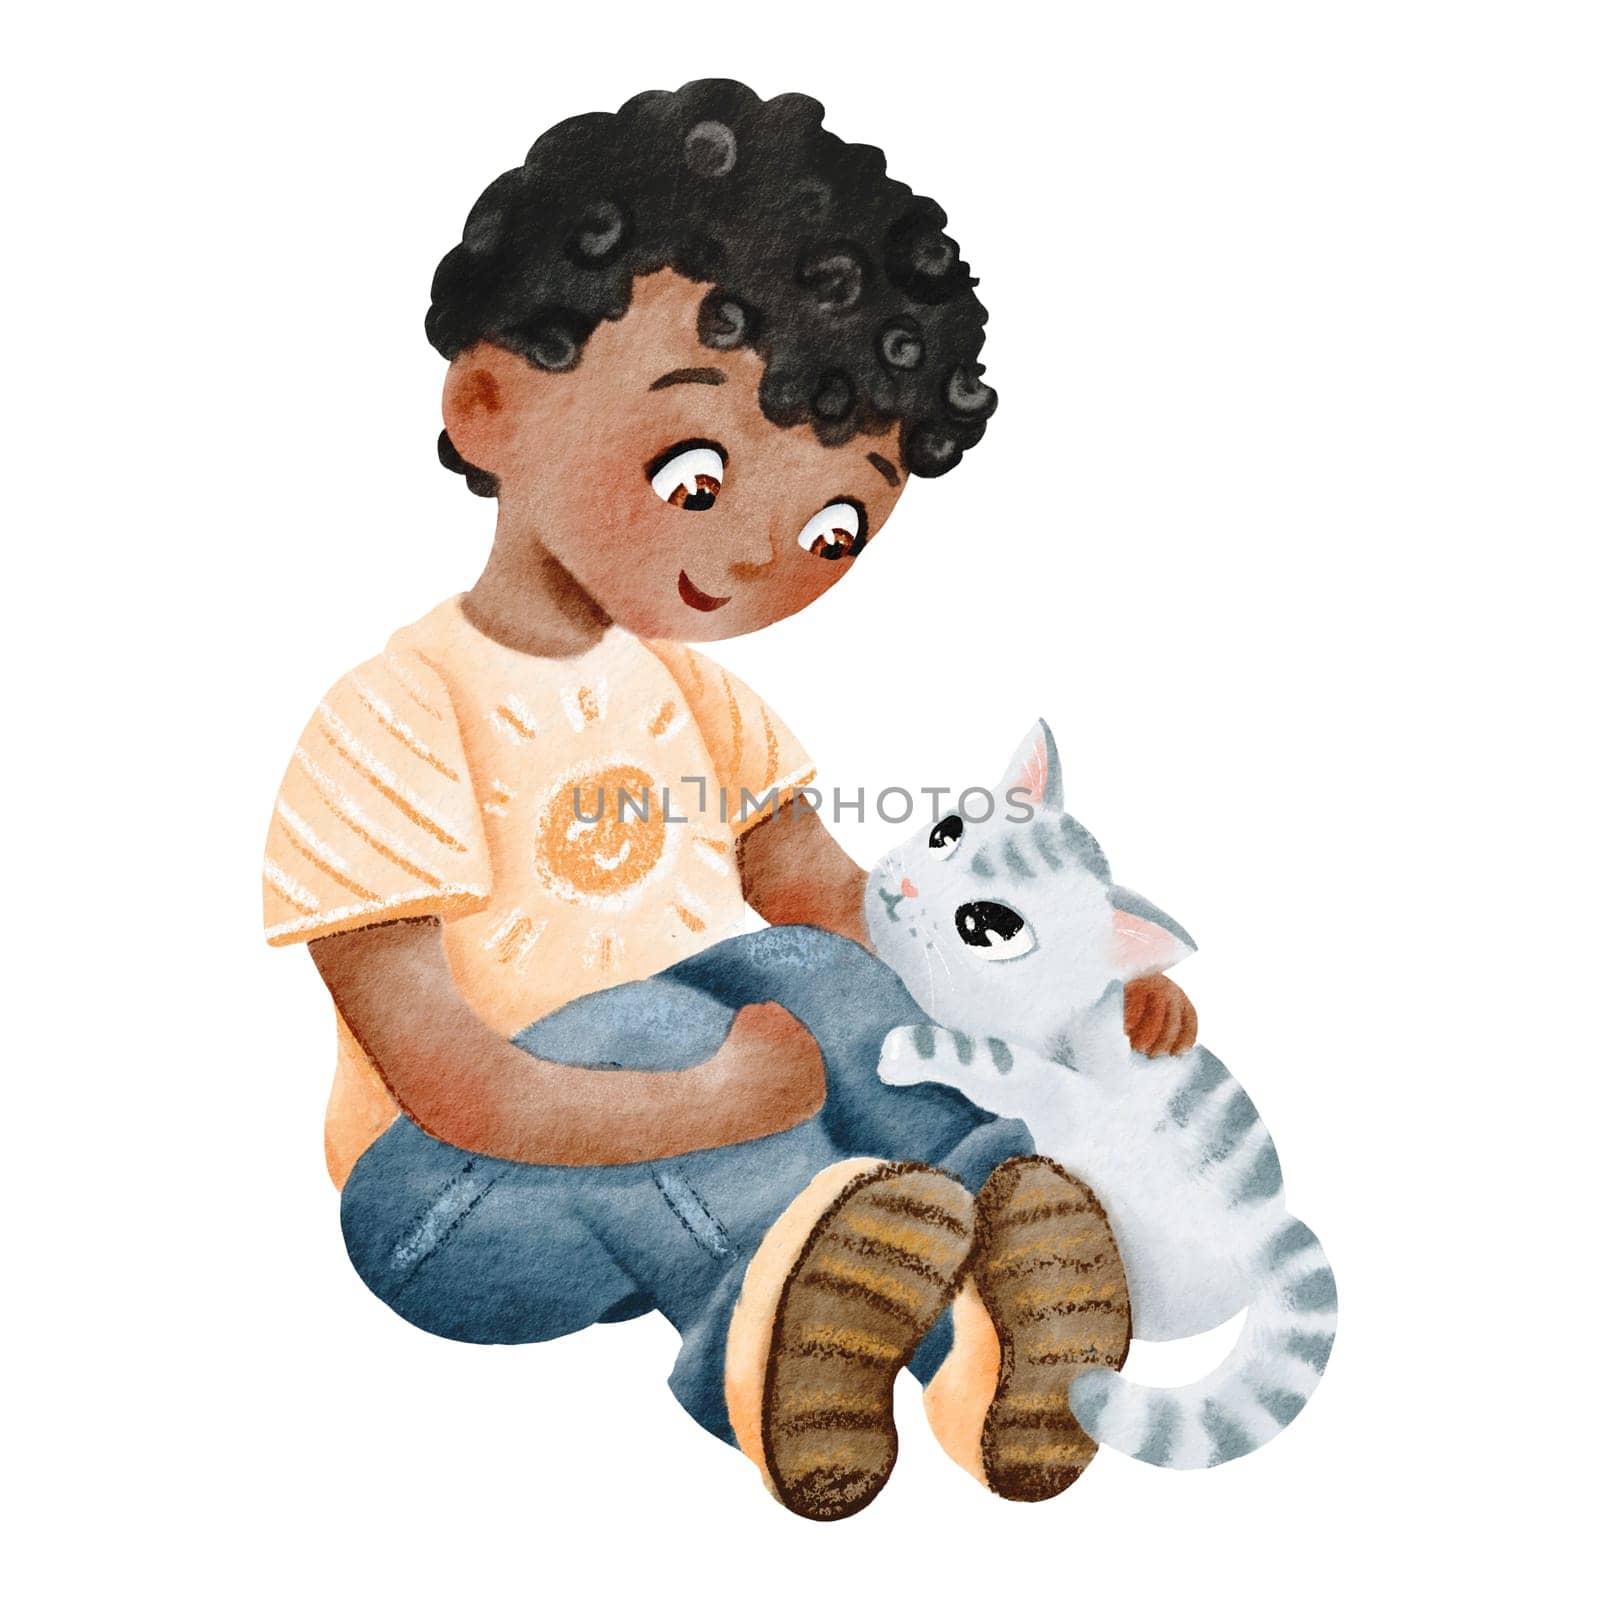 The boy strokes the cat. African American teenager is sitting with his pet. Cute dark-skinned kid is talking to his striped kitty. Love for animals. Friendship. Watercolor isolated illustration.